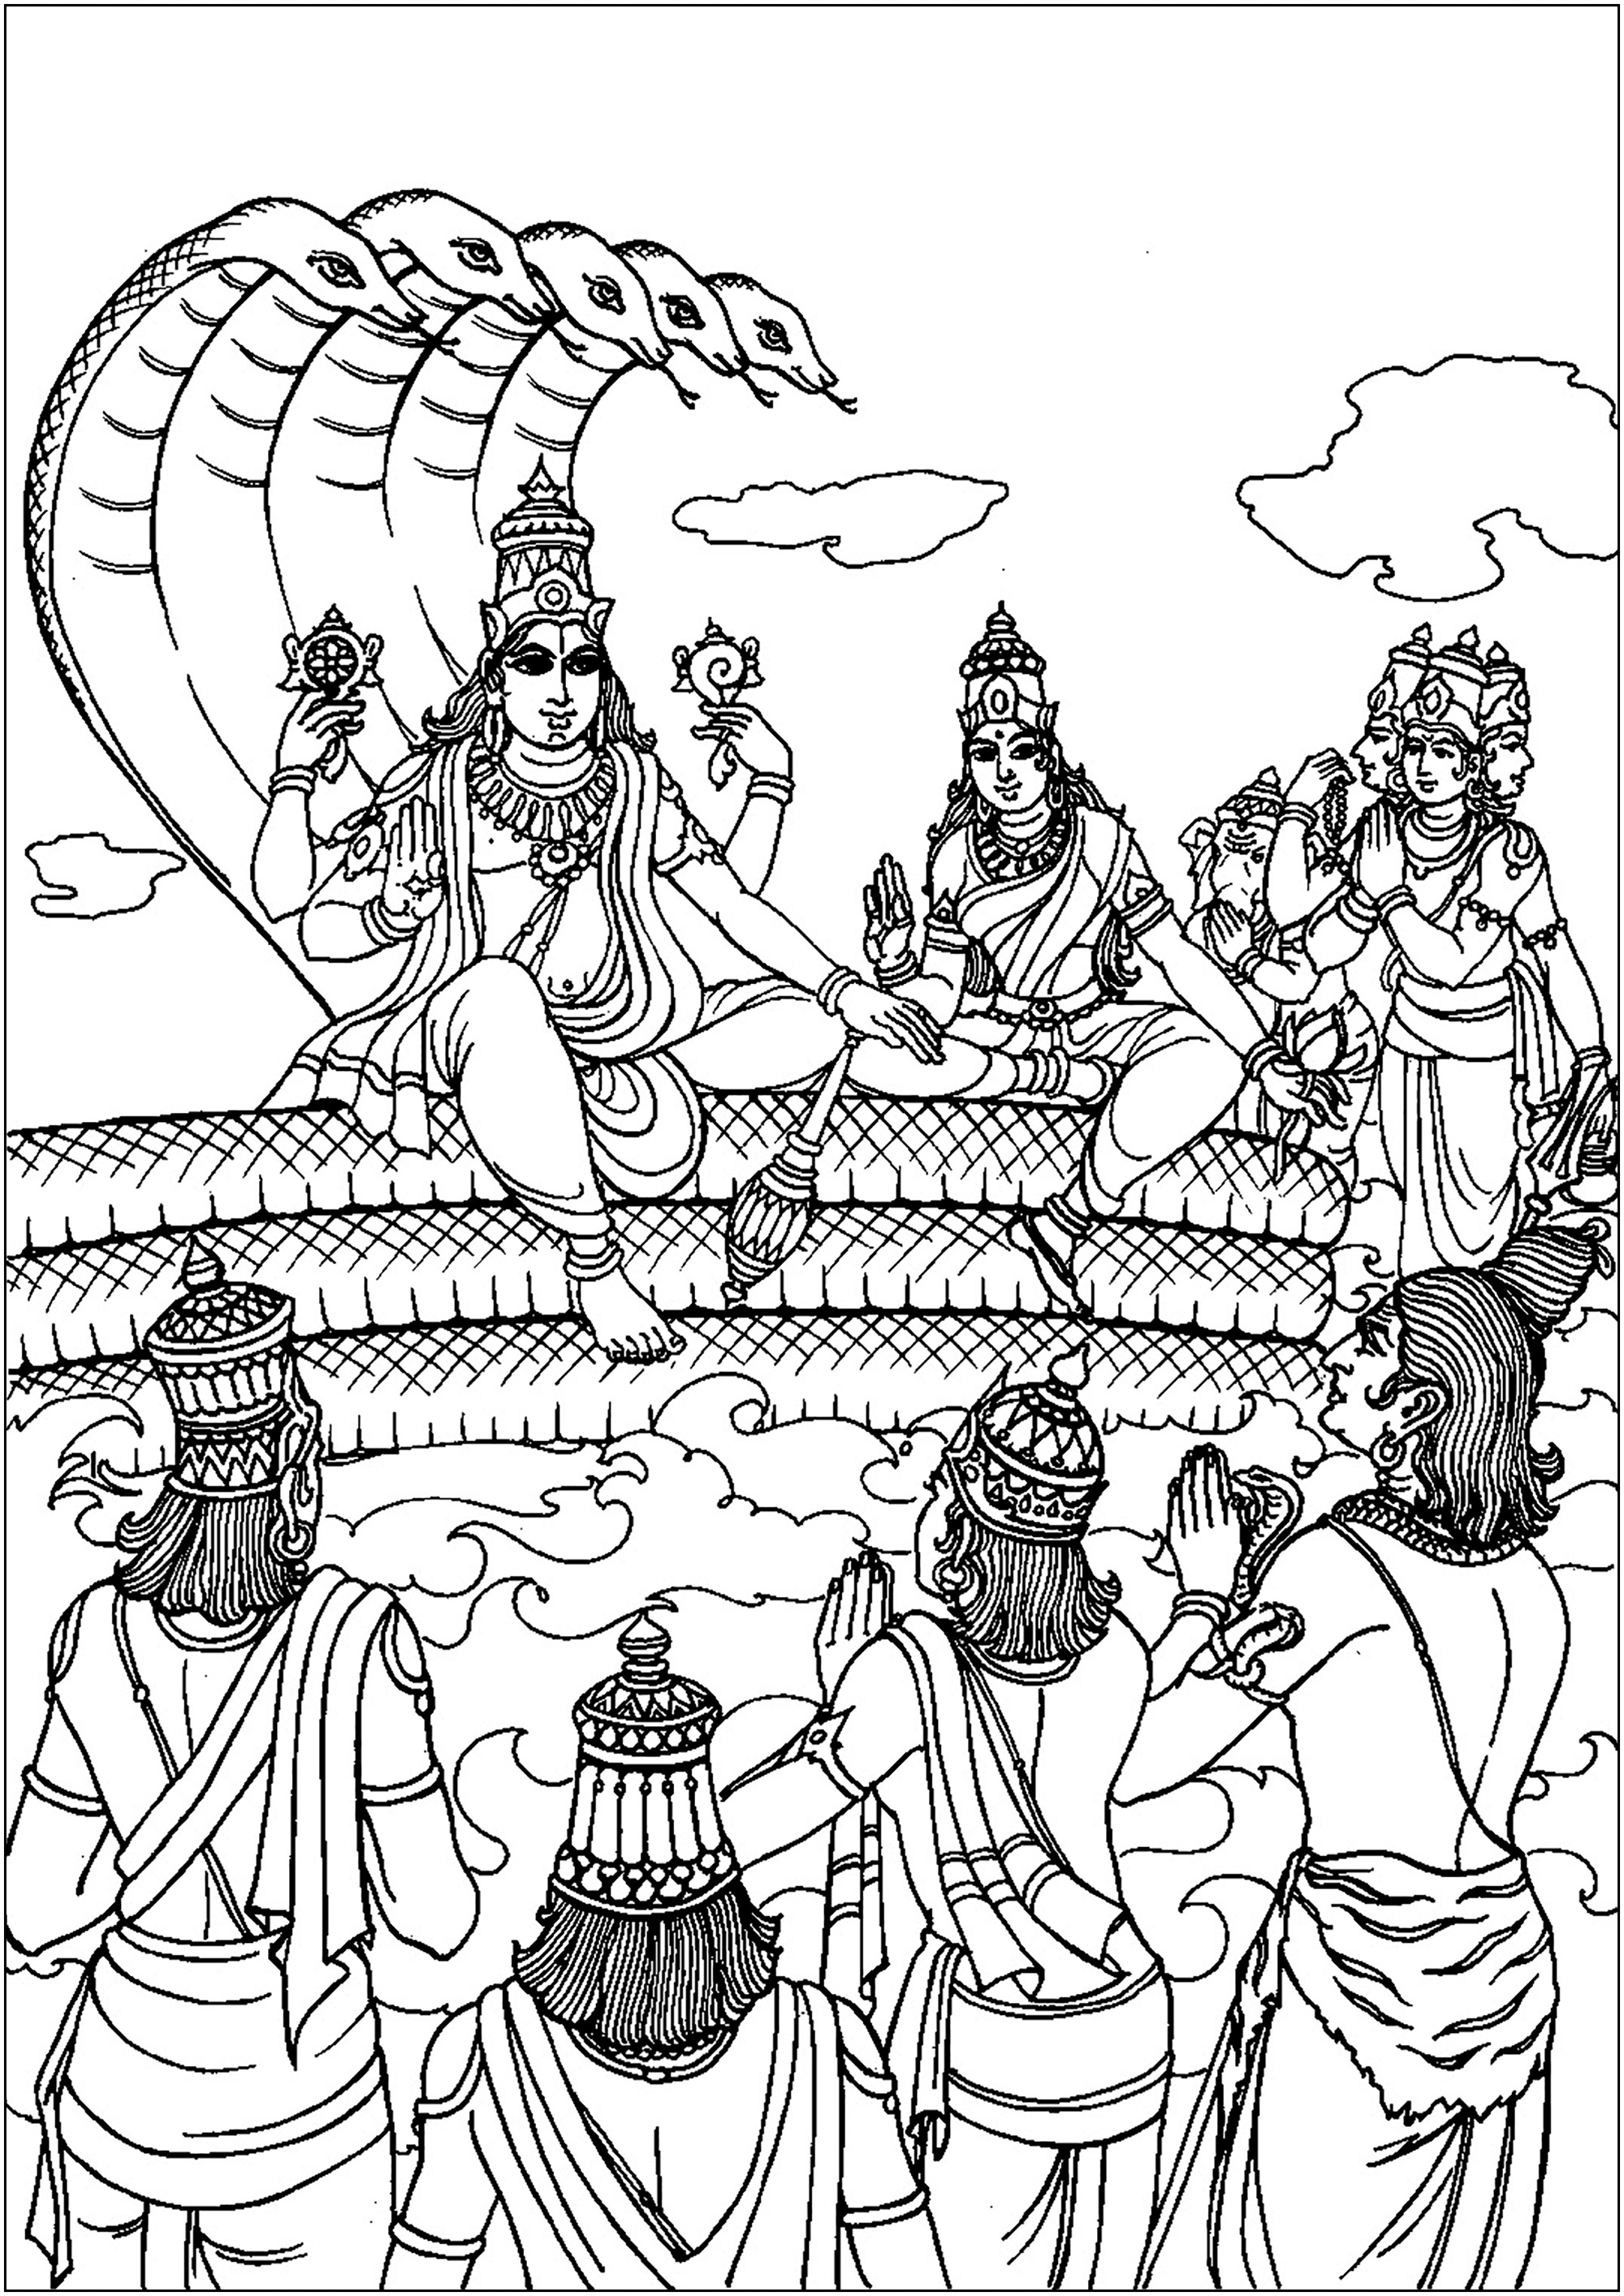 Vishnu who takes human form : Rama, to visit men. Vishnu is a major deity in Hinduism, regarded as the preserver of the universe.He is often depicted resting on the divine serpent, Ananta Shesha, with four arms holding sacred symbols. Vishnu embodies benevolence and periodically intervenes in the world under different avatars (incarnations) to restore cosmic order and protect virtue.